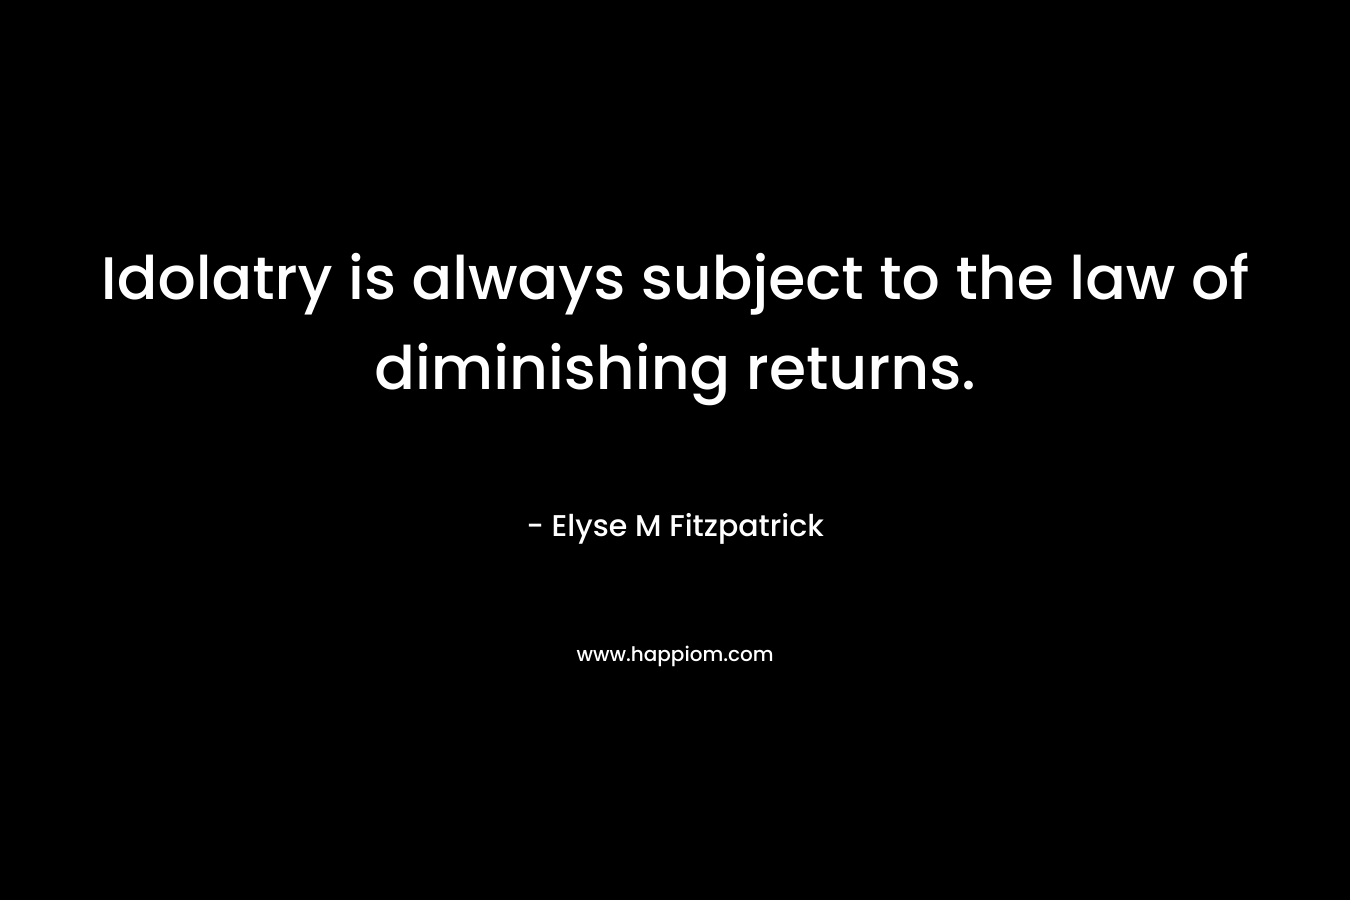 Idolatry is always subject to the law of diminishing returns. – Elyse M Fitzpatrick